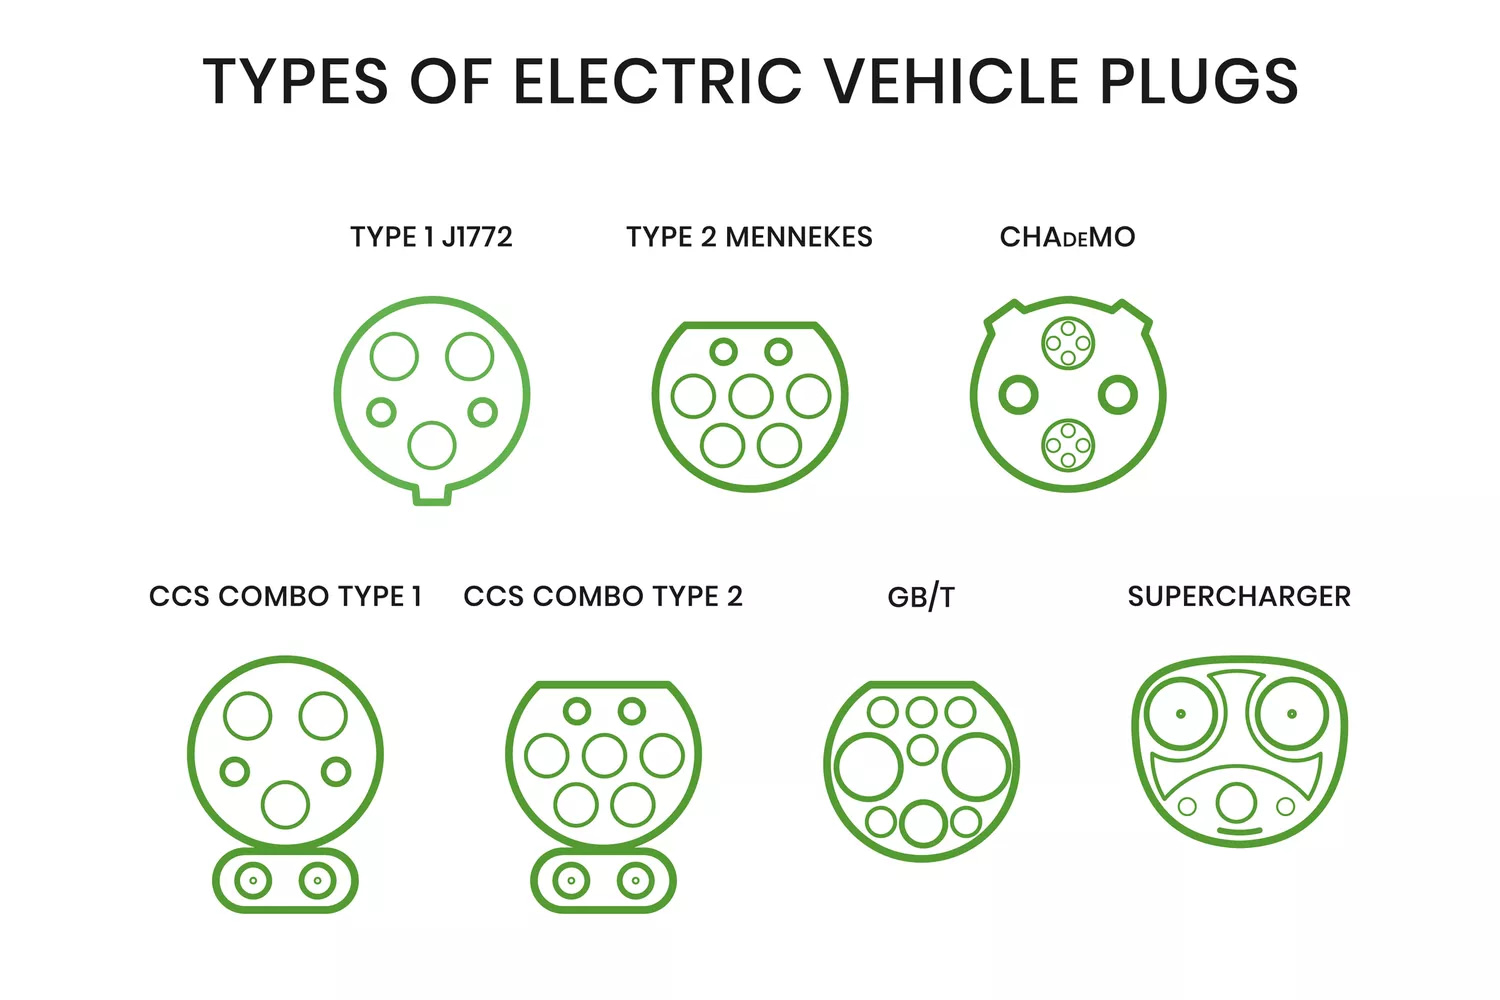 Charging interface type classification